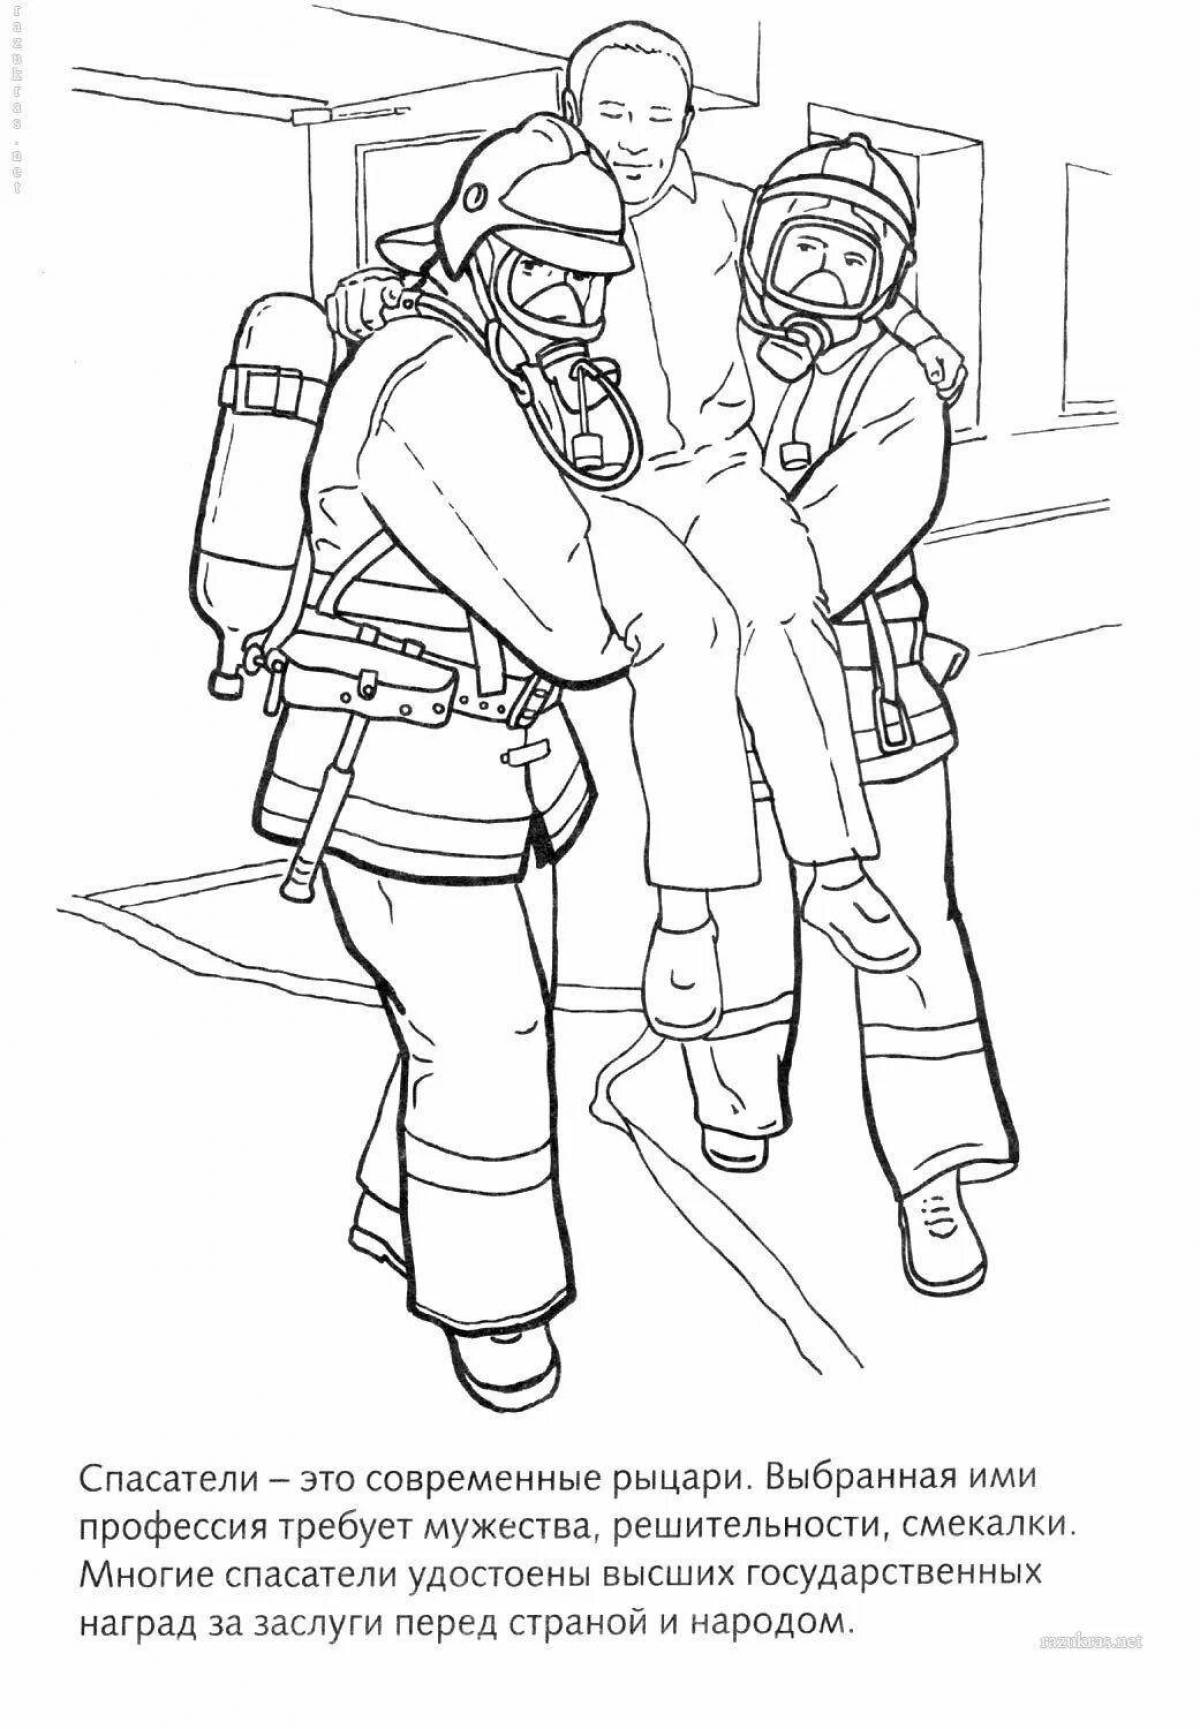 Shining lifeguards coloring page